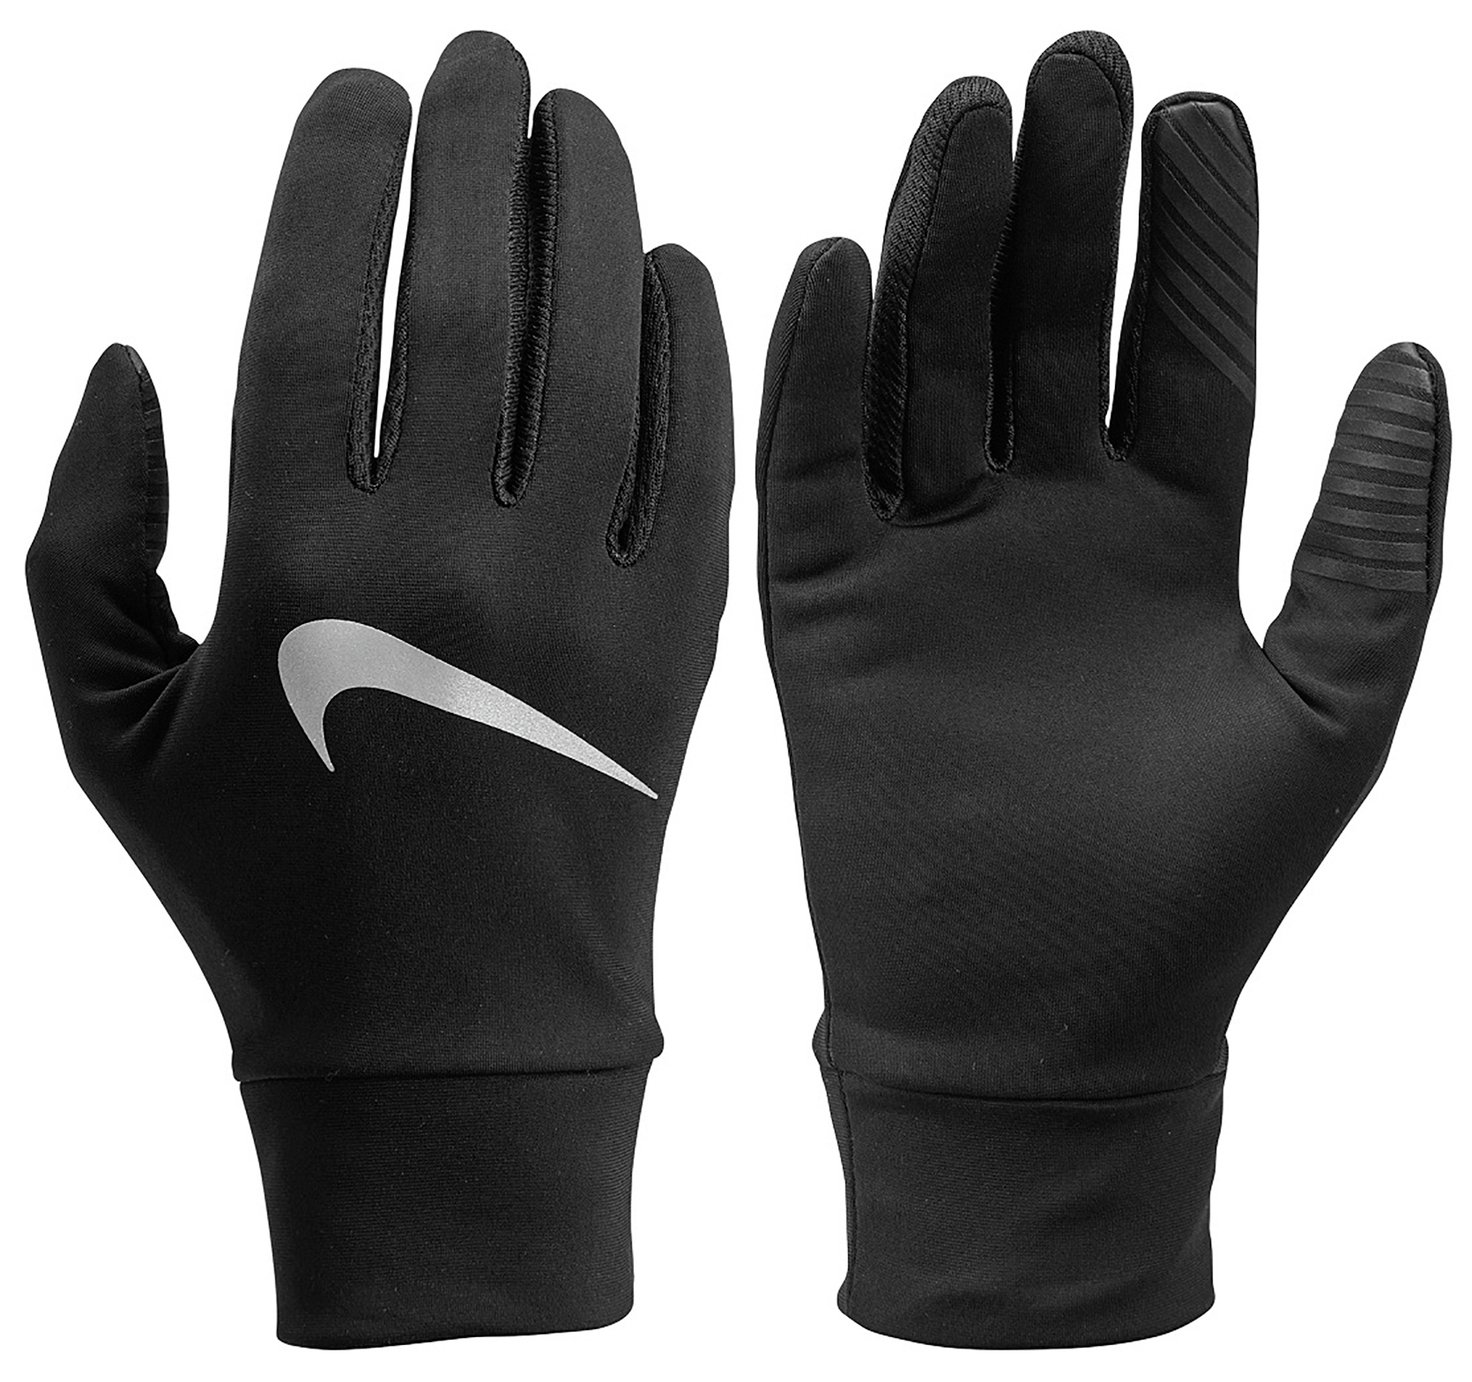 nike touch screen gloves